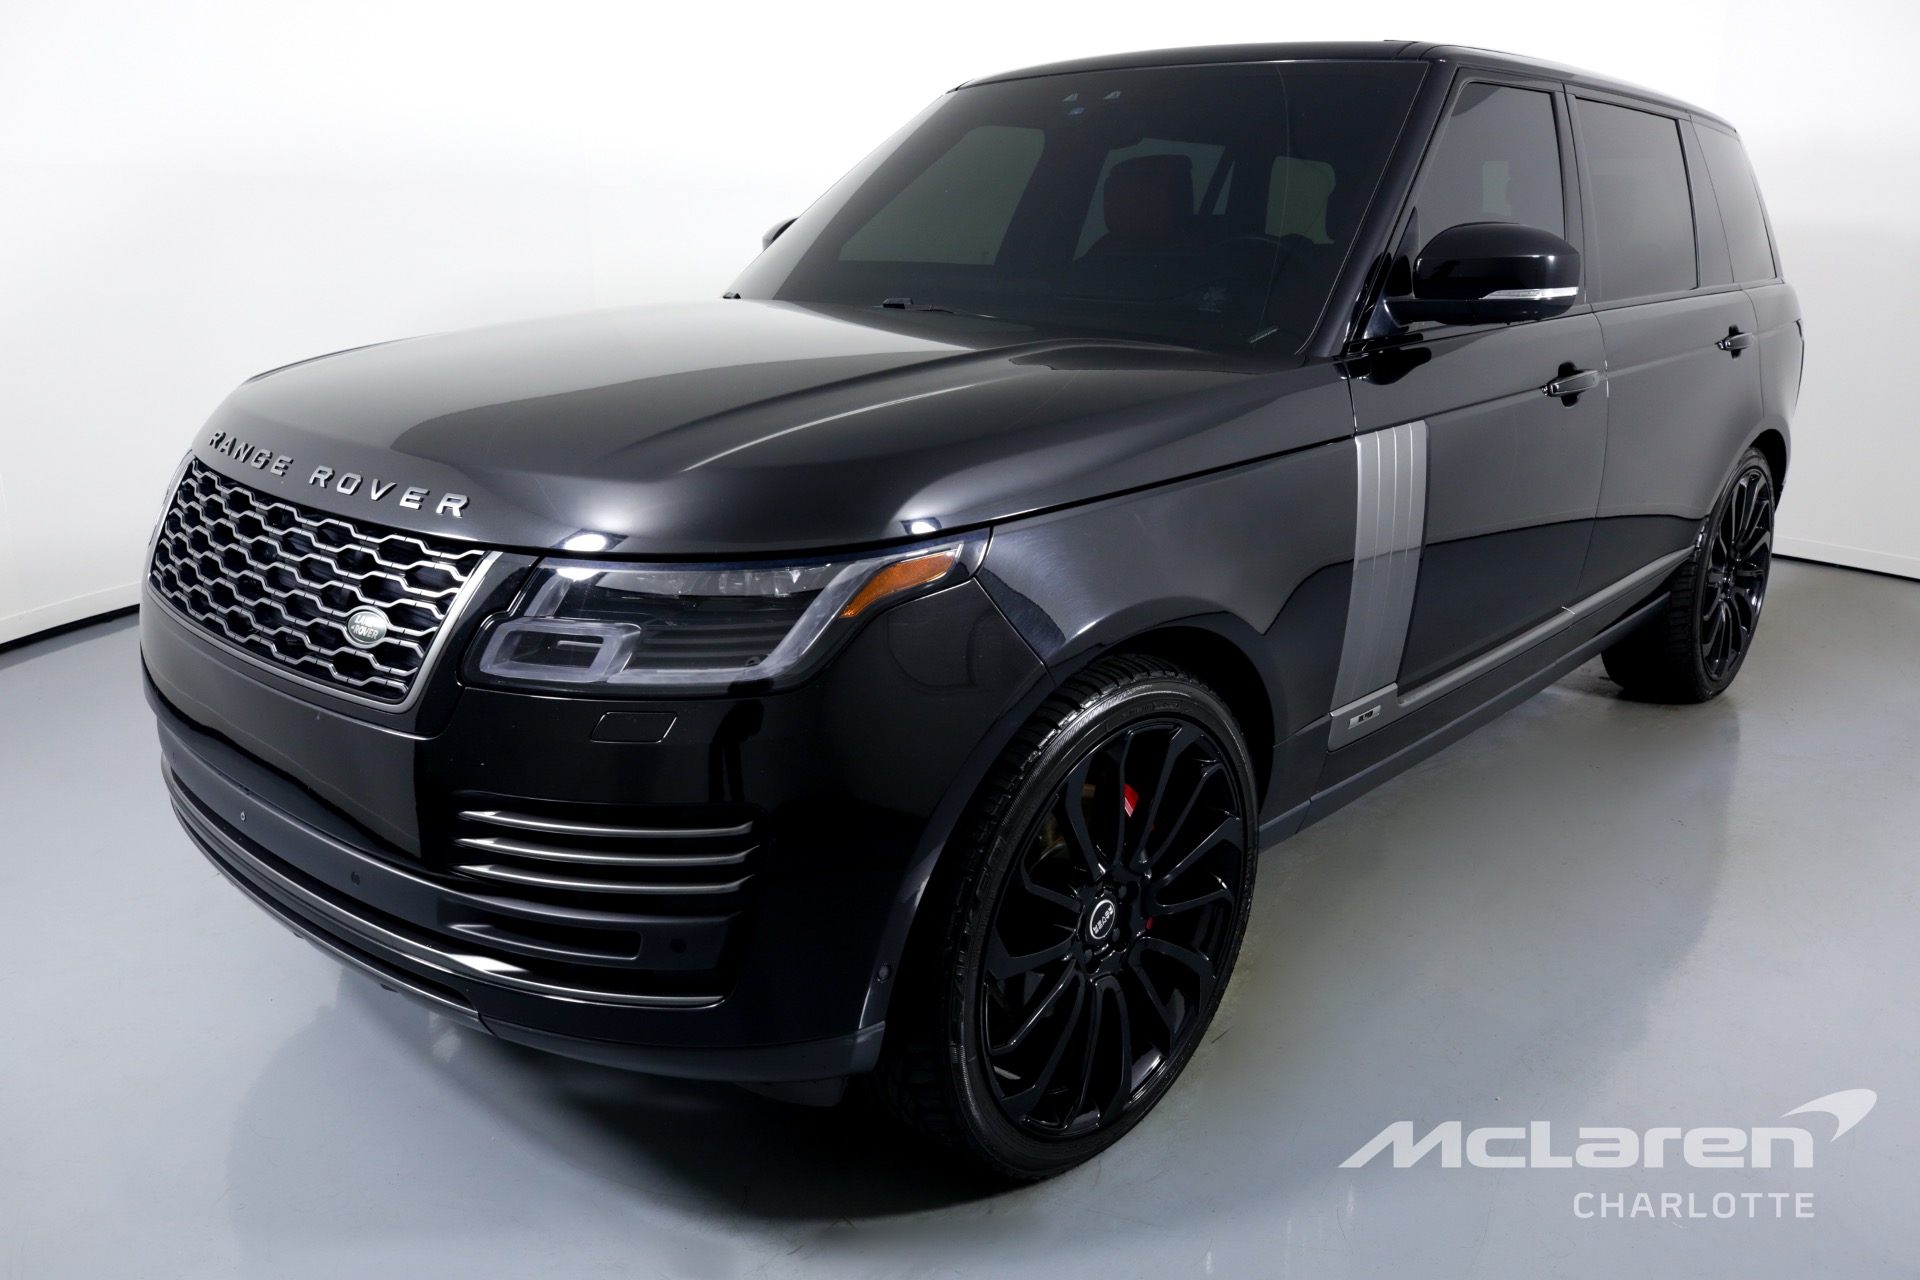 Used 2019 Land Rover Range Rover Autobiography LWB | Charlotte, NC